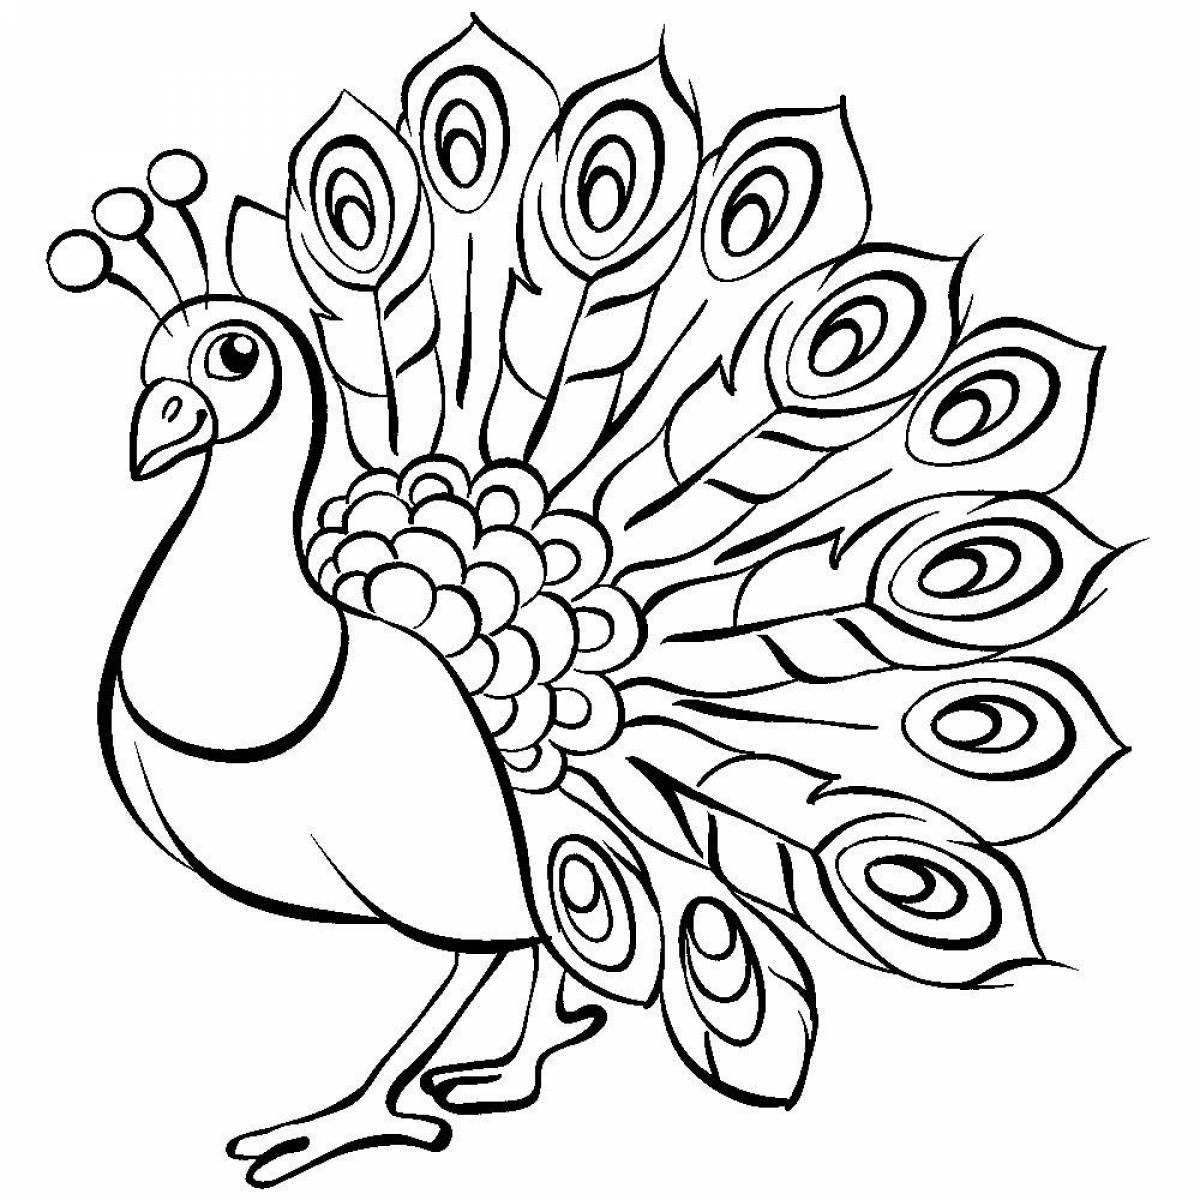 Adorable peacock coloring book for kids